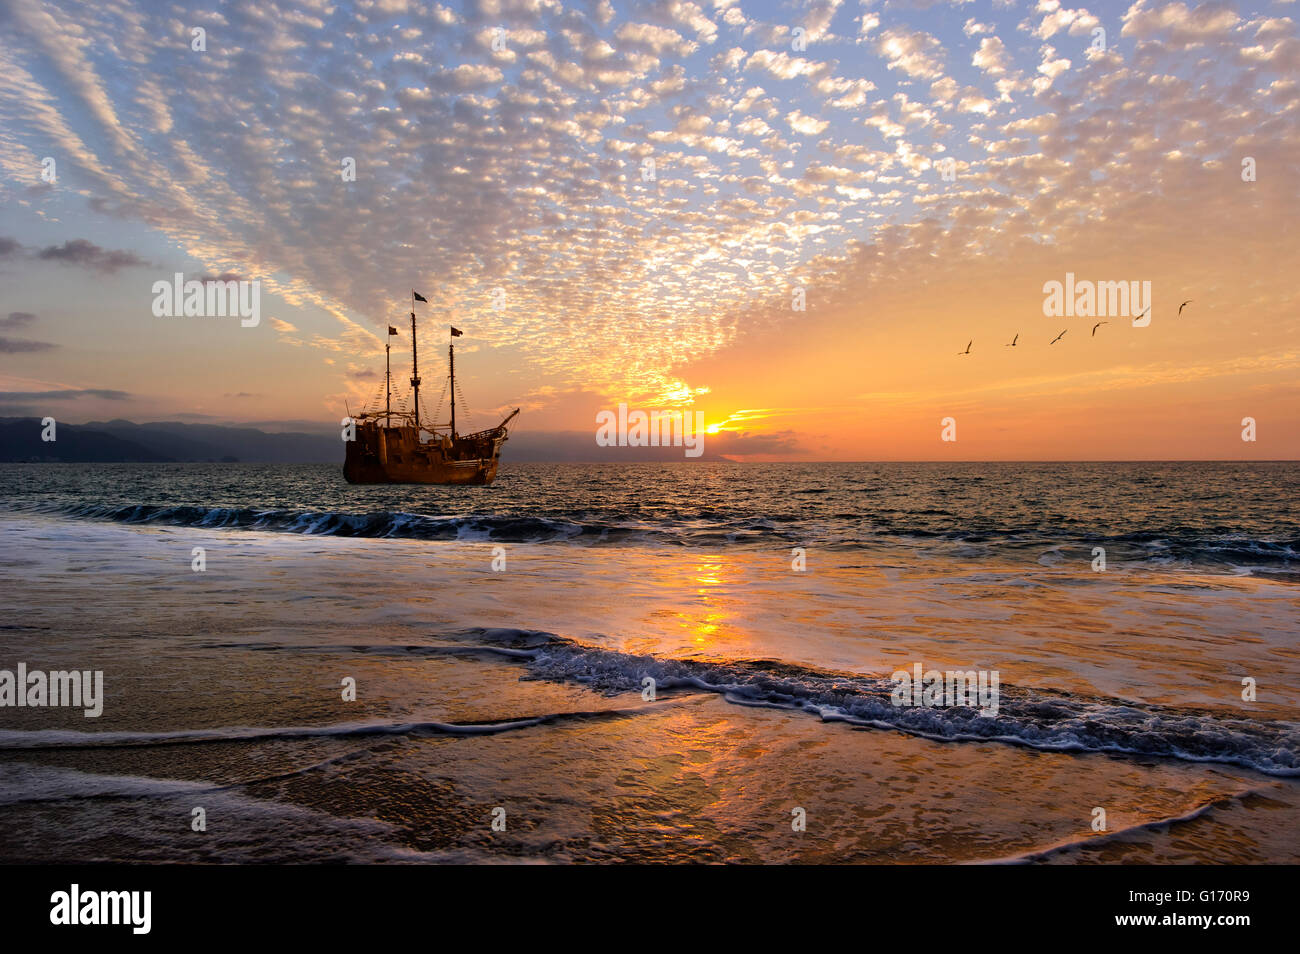 Ship sunset is an old wooden pirate ship with full flags as the sun sets on the ocean horizon in a colorful sunset sky. Stock Photo